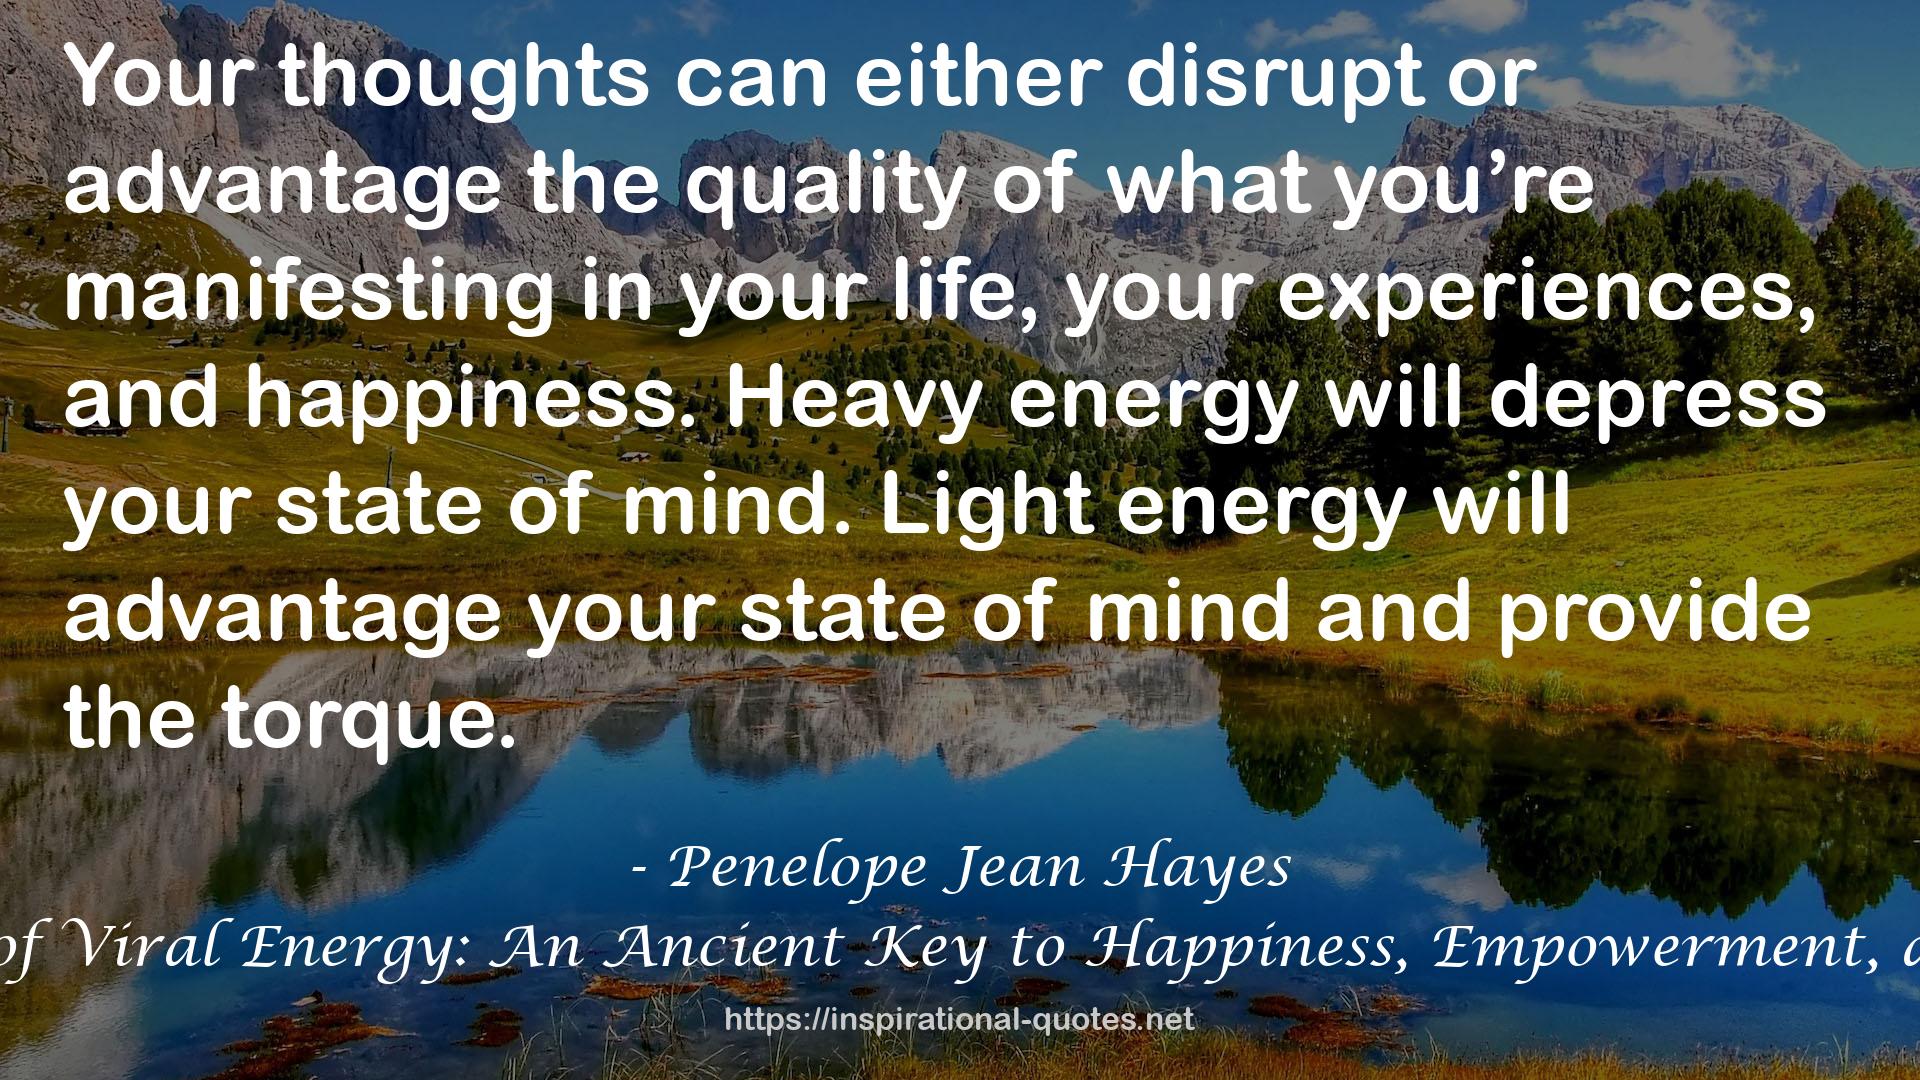 The Magic of Viral Energy: An Ancient Key to Happiness, Empowerment, and Purpose QUOTES